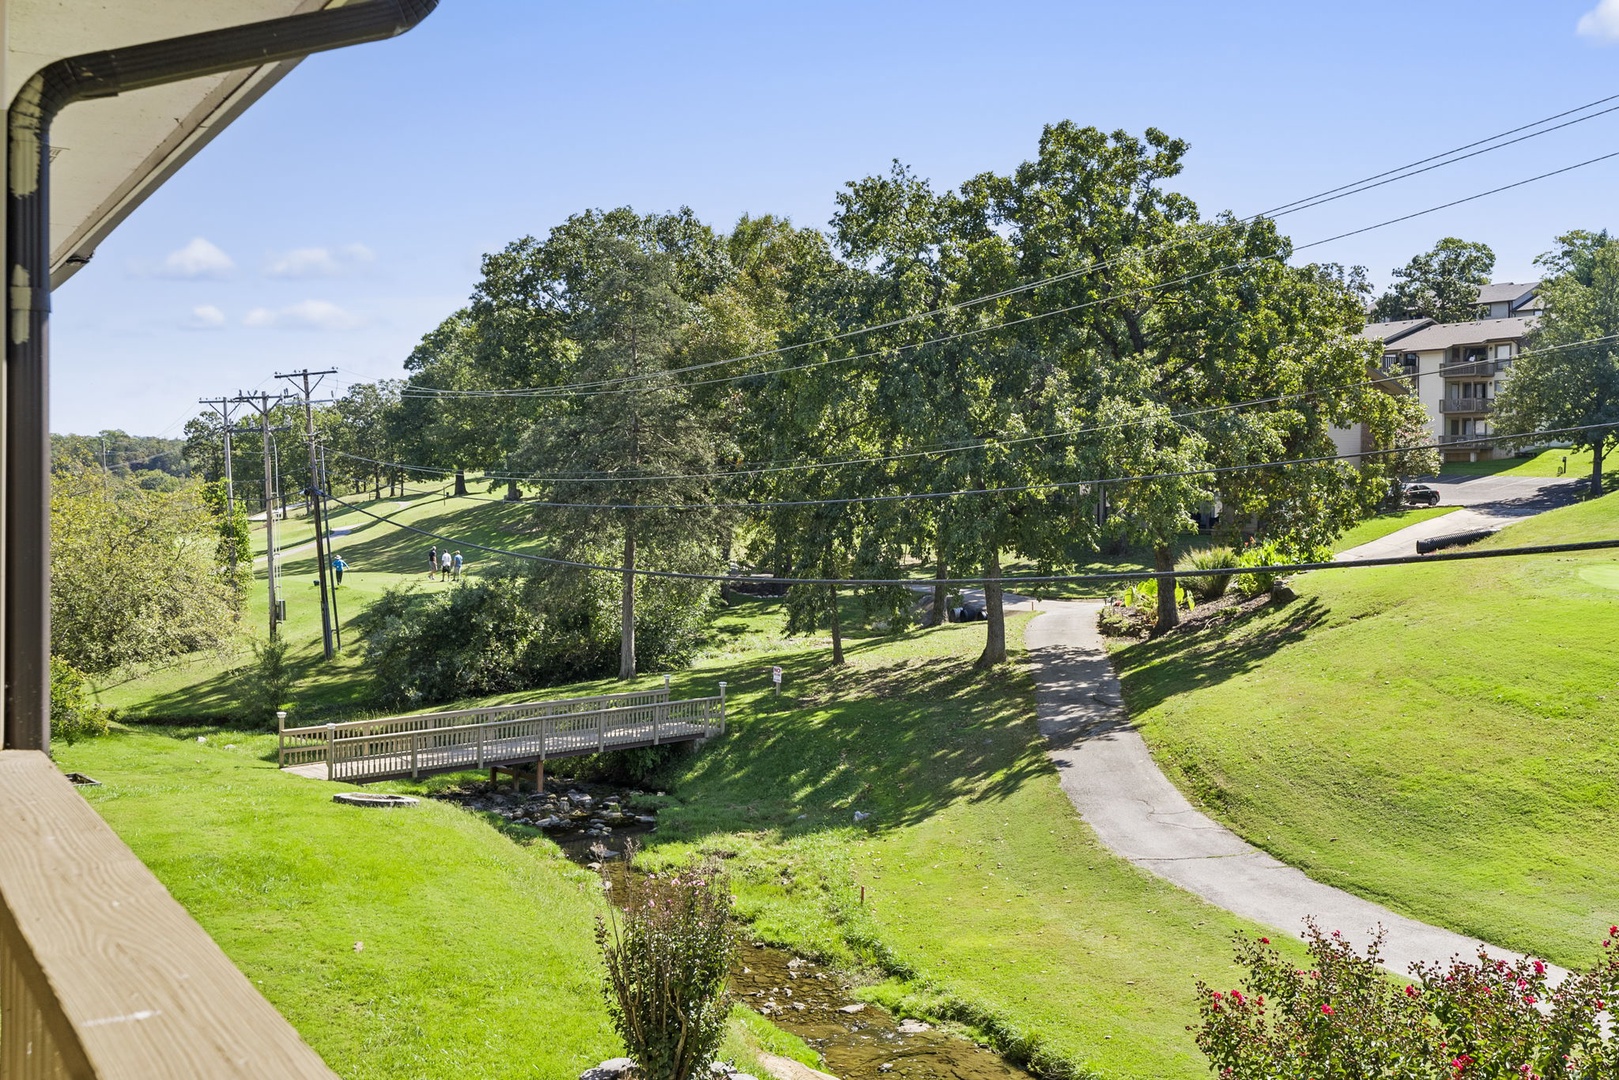 Lounge the day away with gorgeous golf course views from the balcony